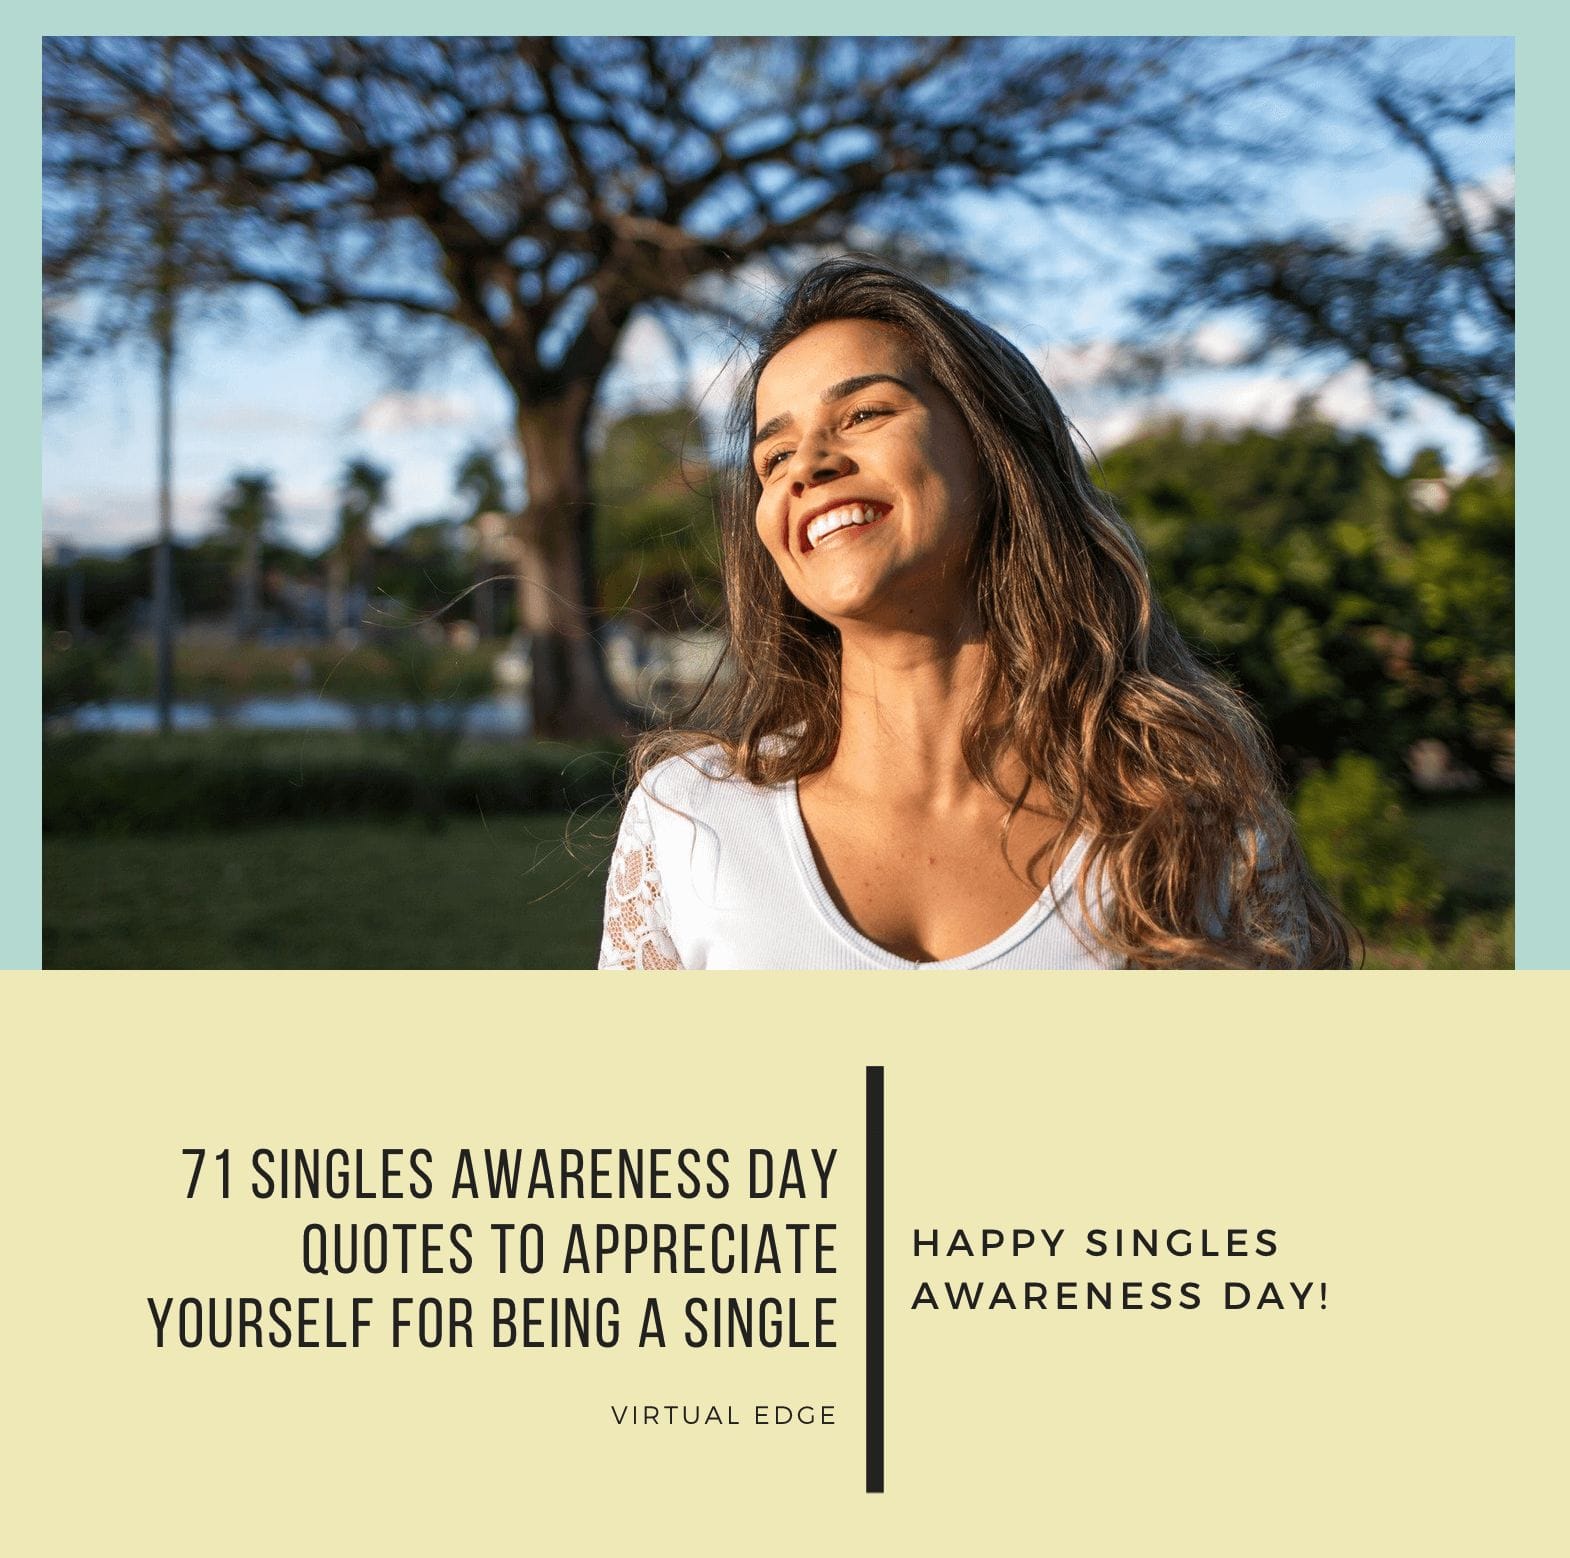 71 Singles Awareness Day Quotes to Appreciate Yourself for Being a Single